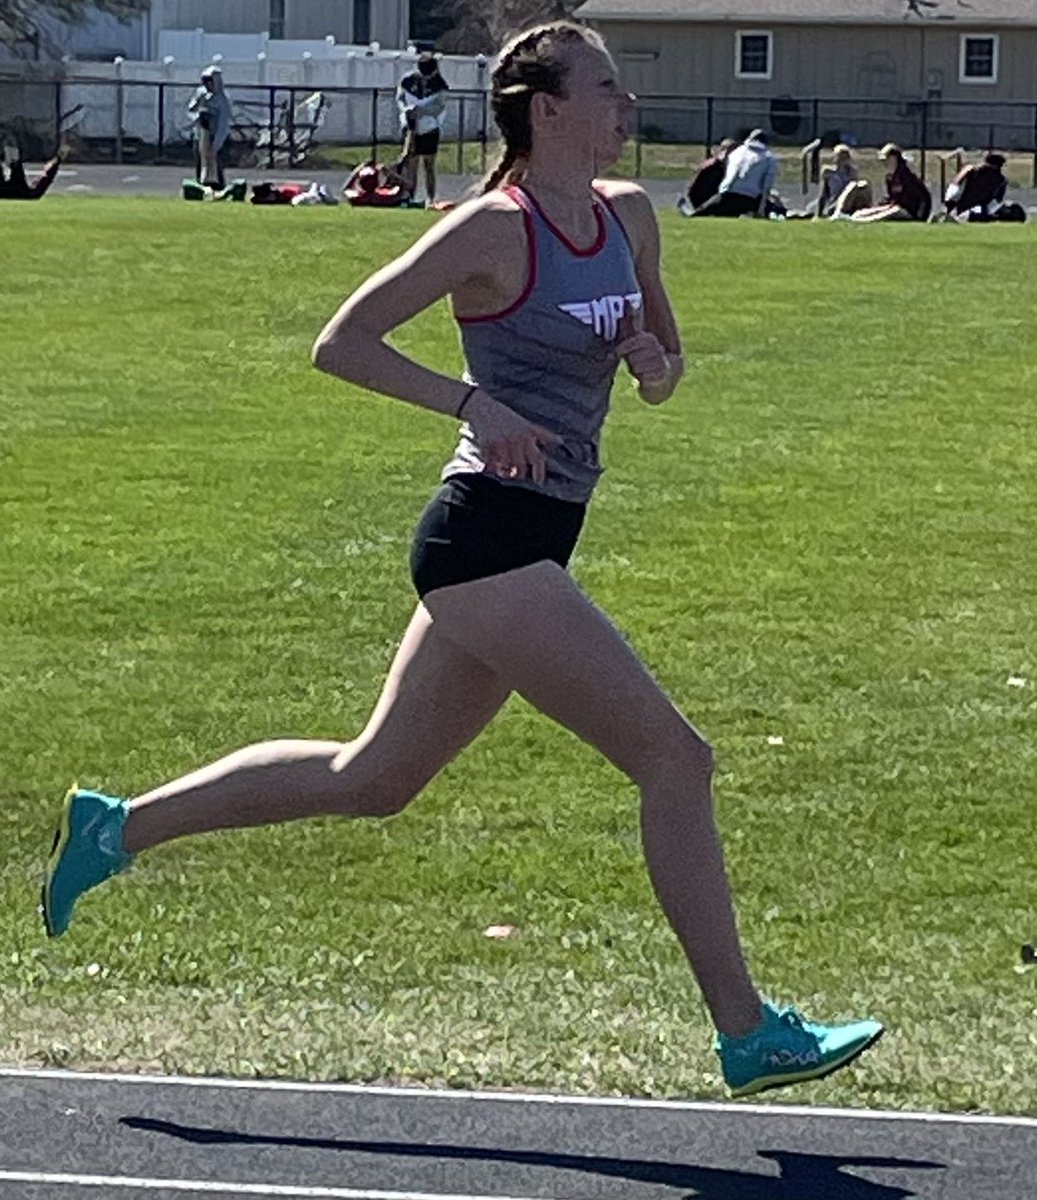 Outdoor season kicked off at Metamora. Beyer runs a 2:19:09 takes🥇& she takes down a 27 yr. old MHS record in the 800m🔥! More top finishes 1600m-Krueger 5:19🥇& Armstrong 5:30 (2nd), Long Jump-I. Hutchinson 4.89m (3rd) & 4x800 relay-Armstrong, Braker, Krueger, Beyer take🥇.